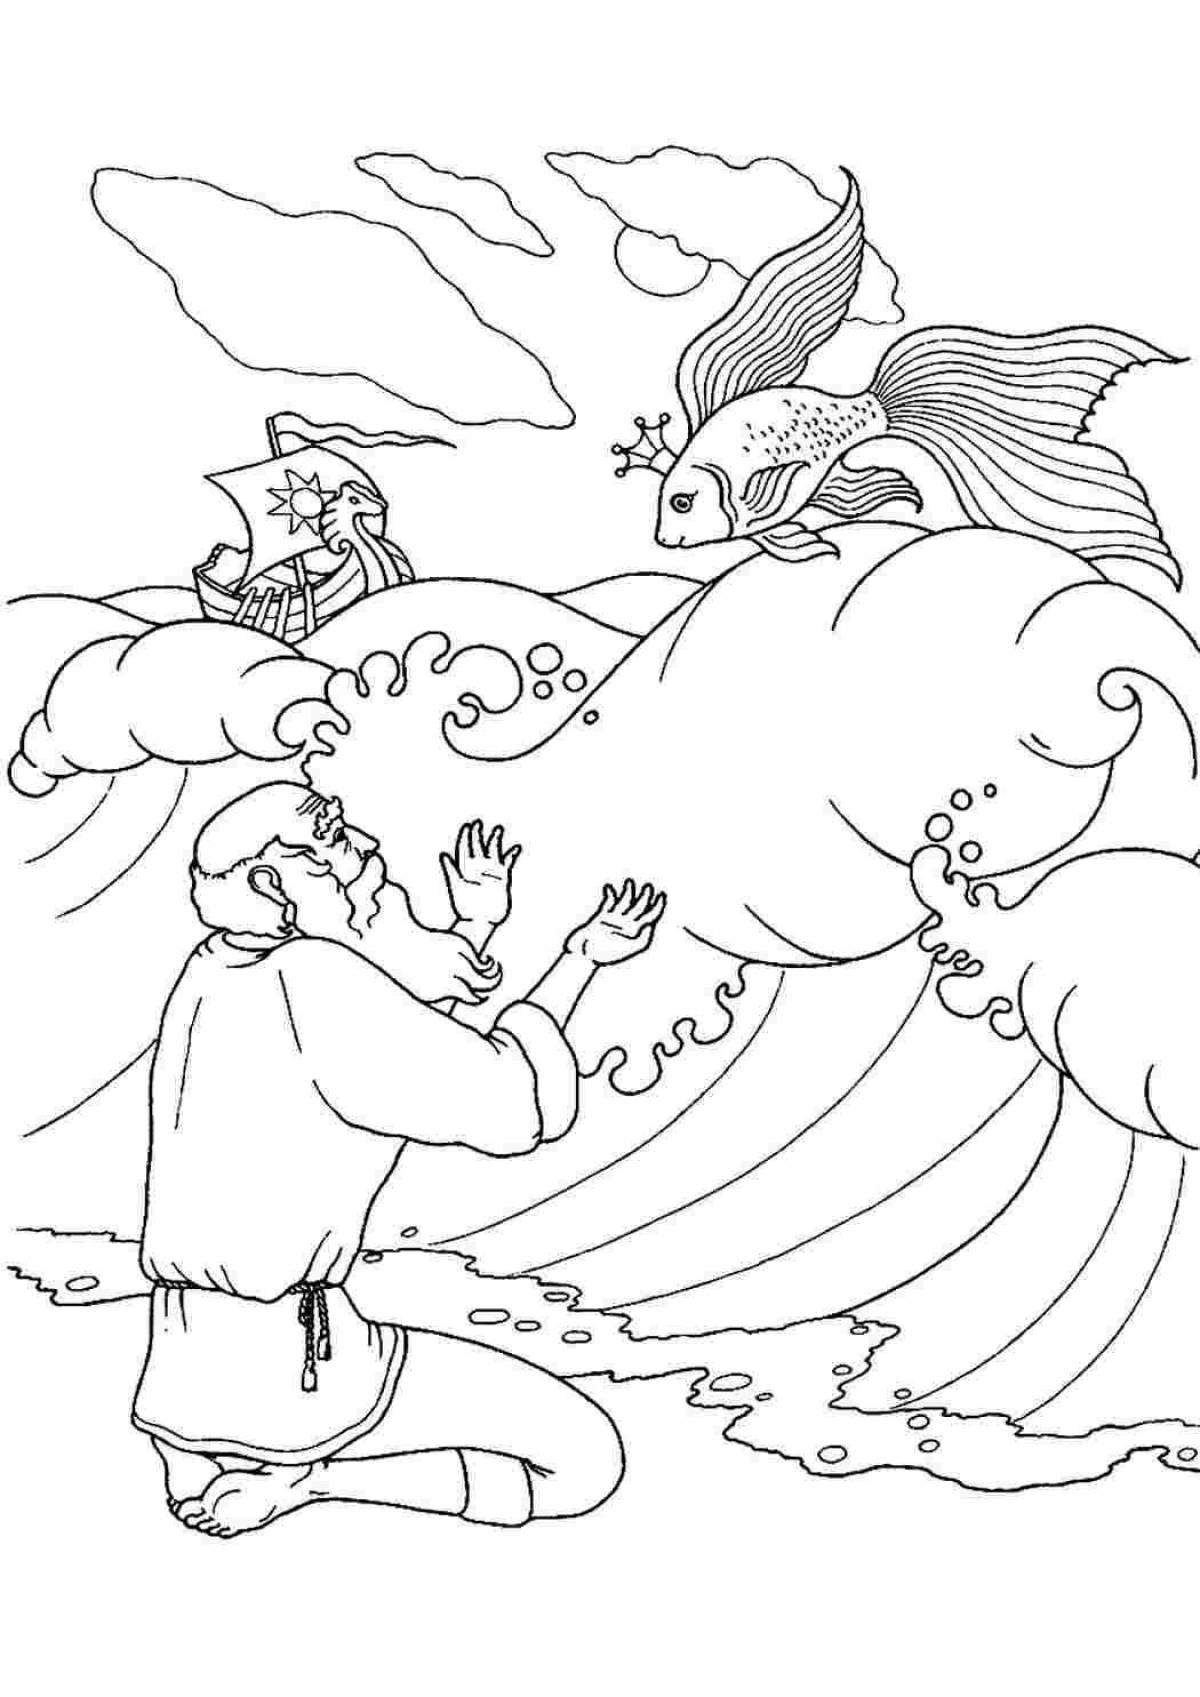 Fancy coloring for children 3-4 years old based on Pushkin's fairy tales